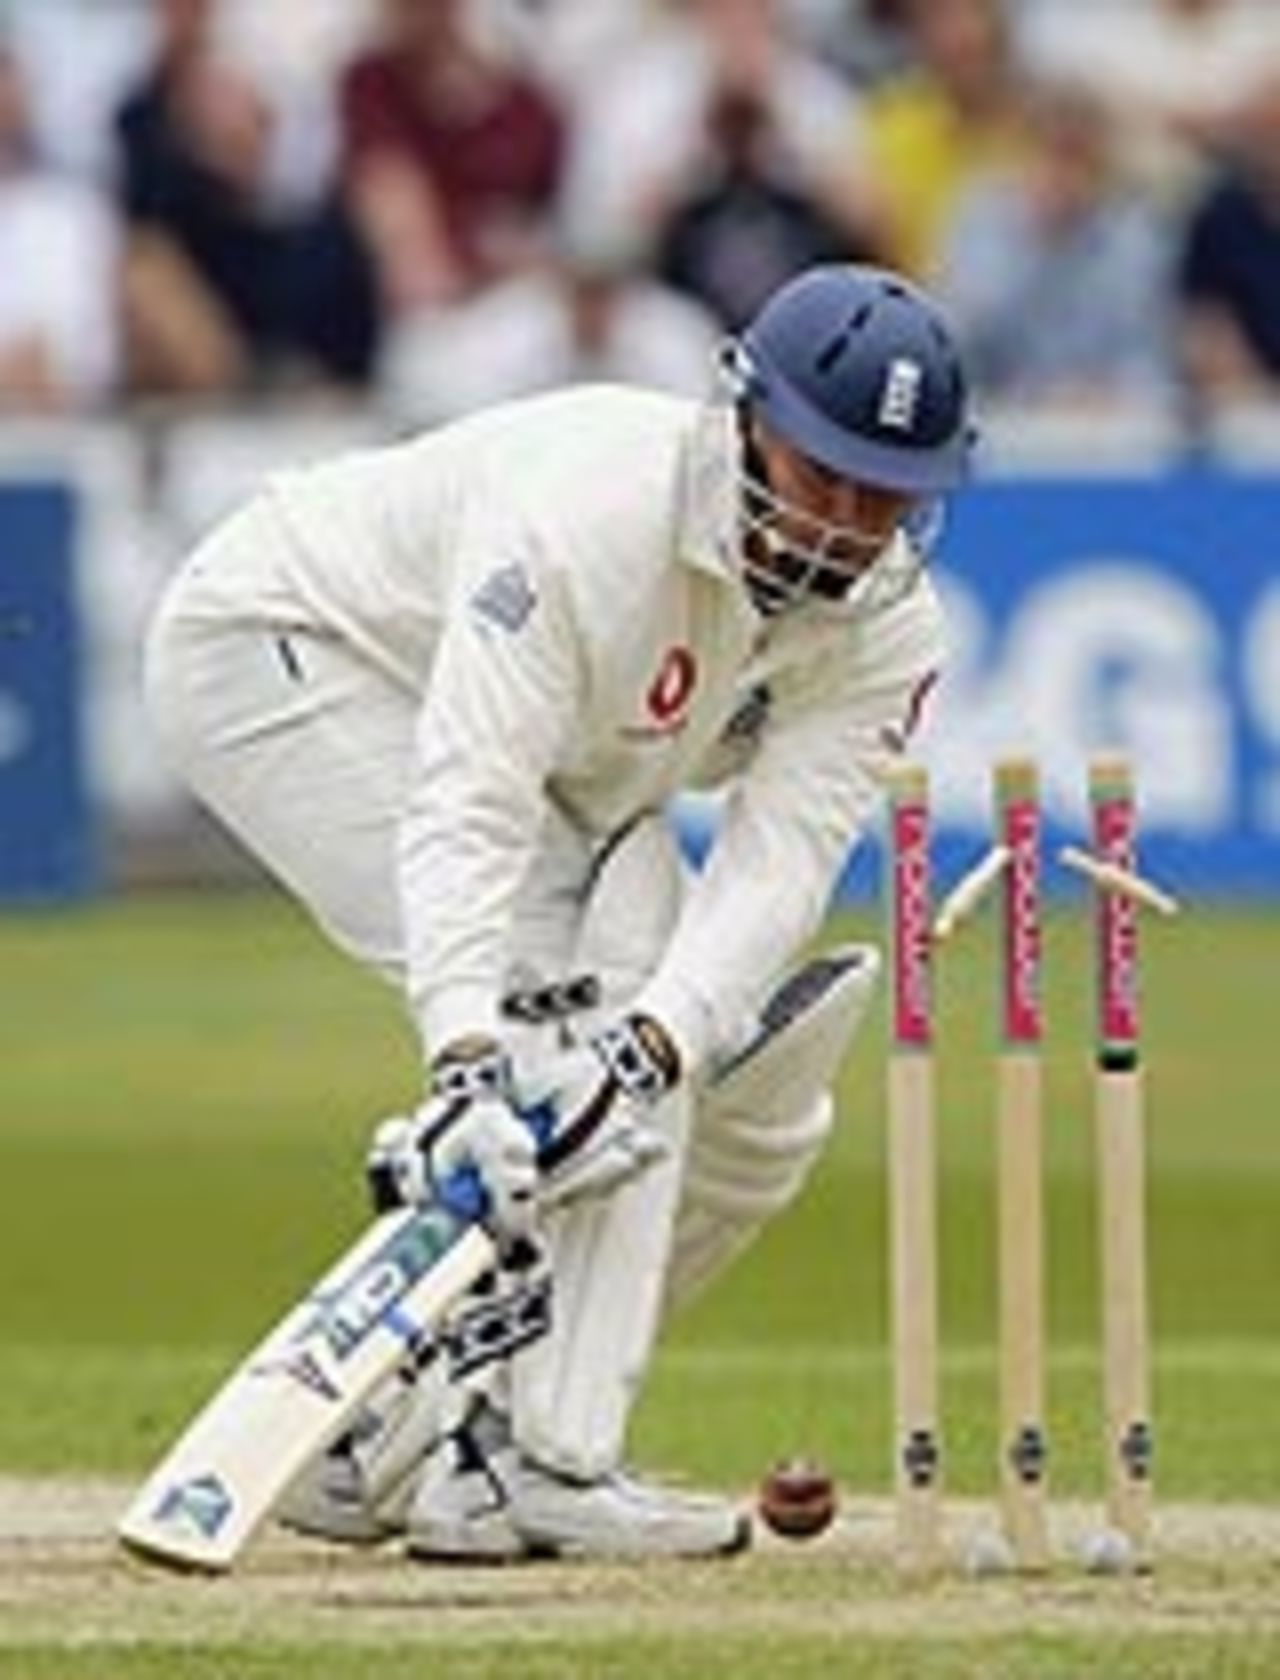 Martin Saggers is bowled by a slower ball, England v New Zealand, Trent Bridge, 3rd day, June 11, 2004